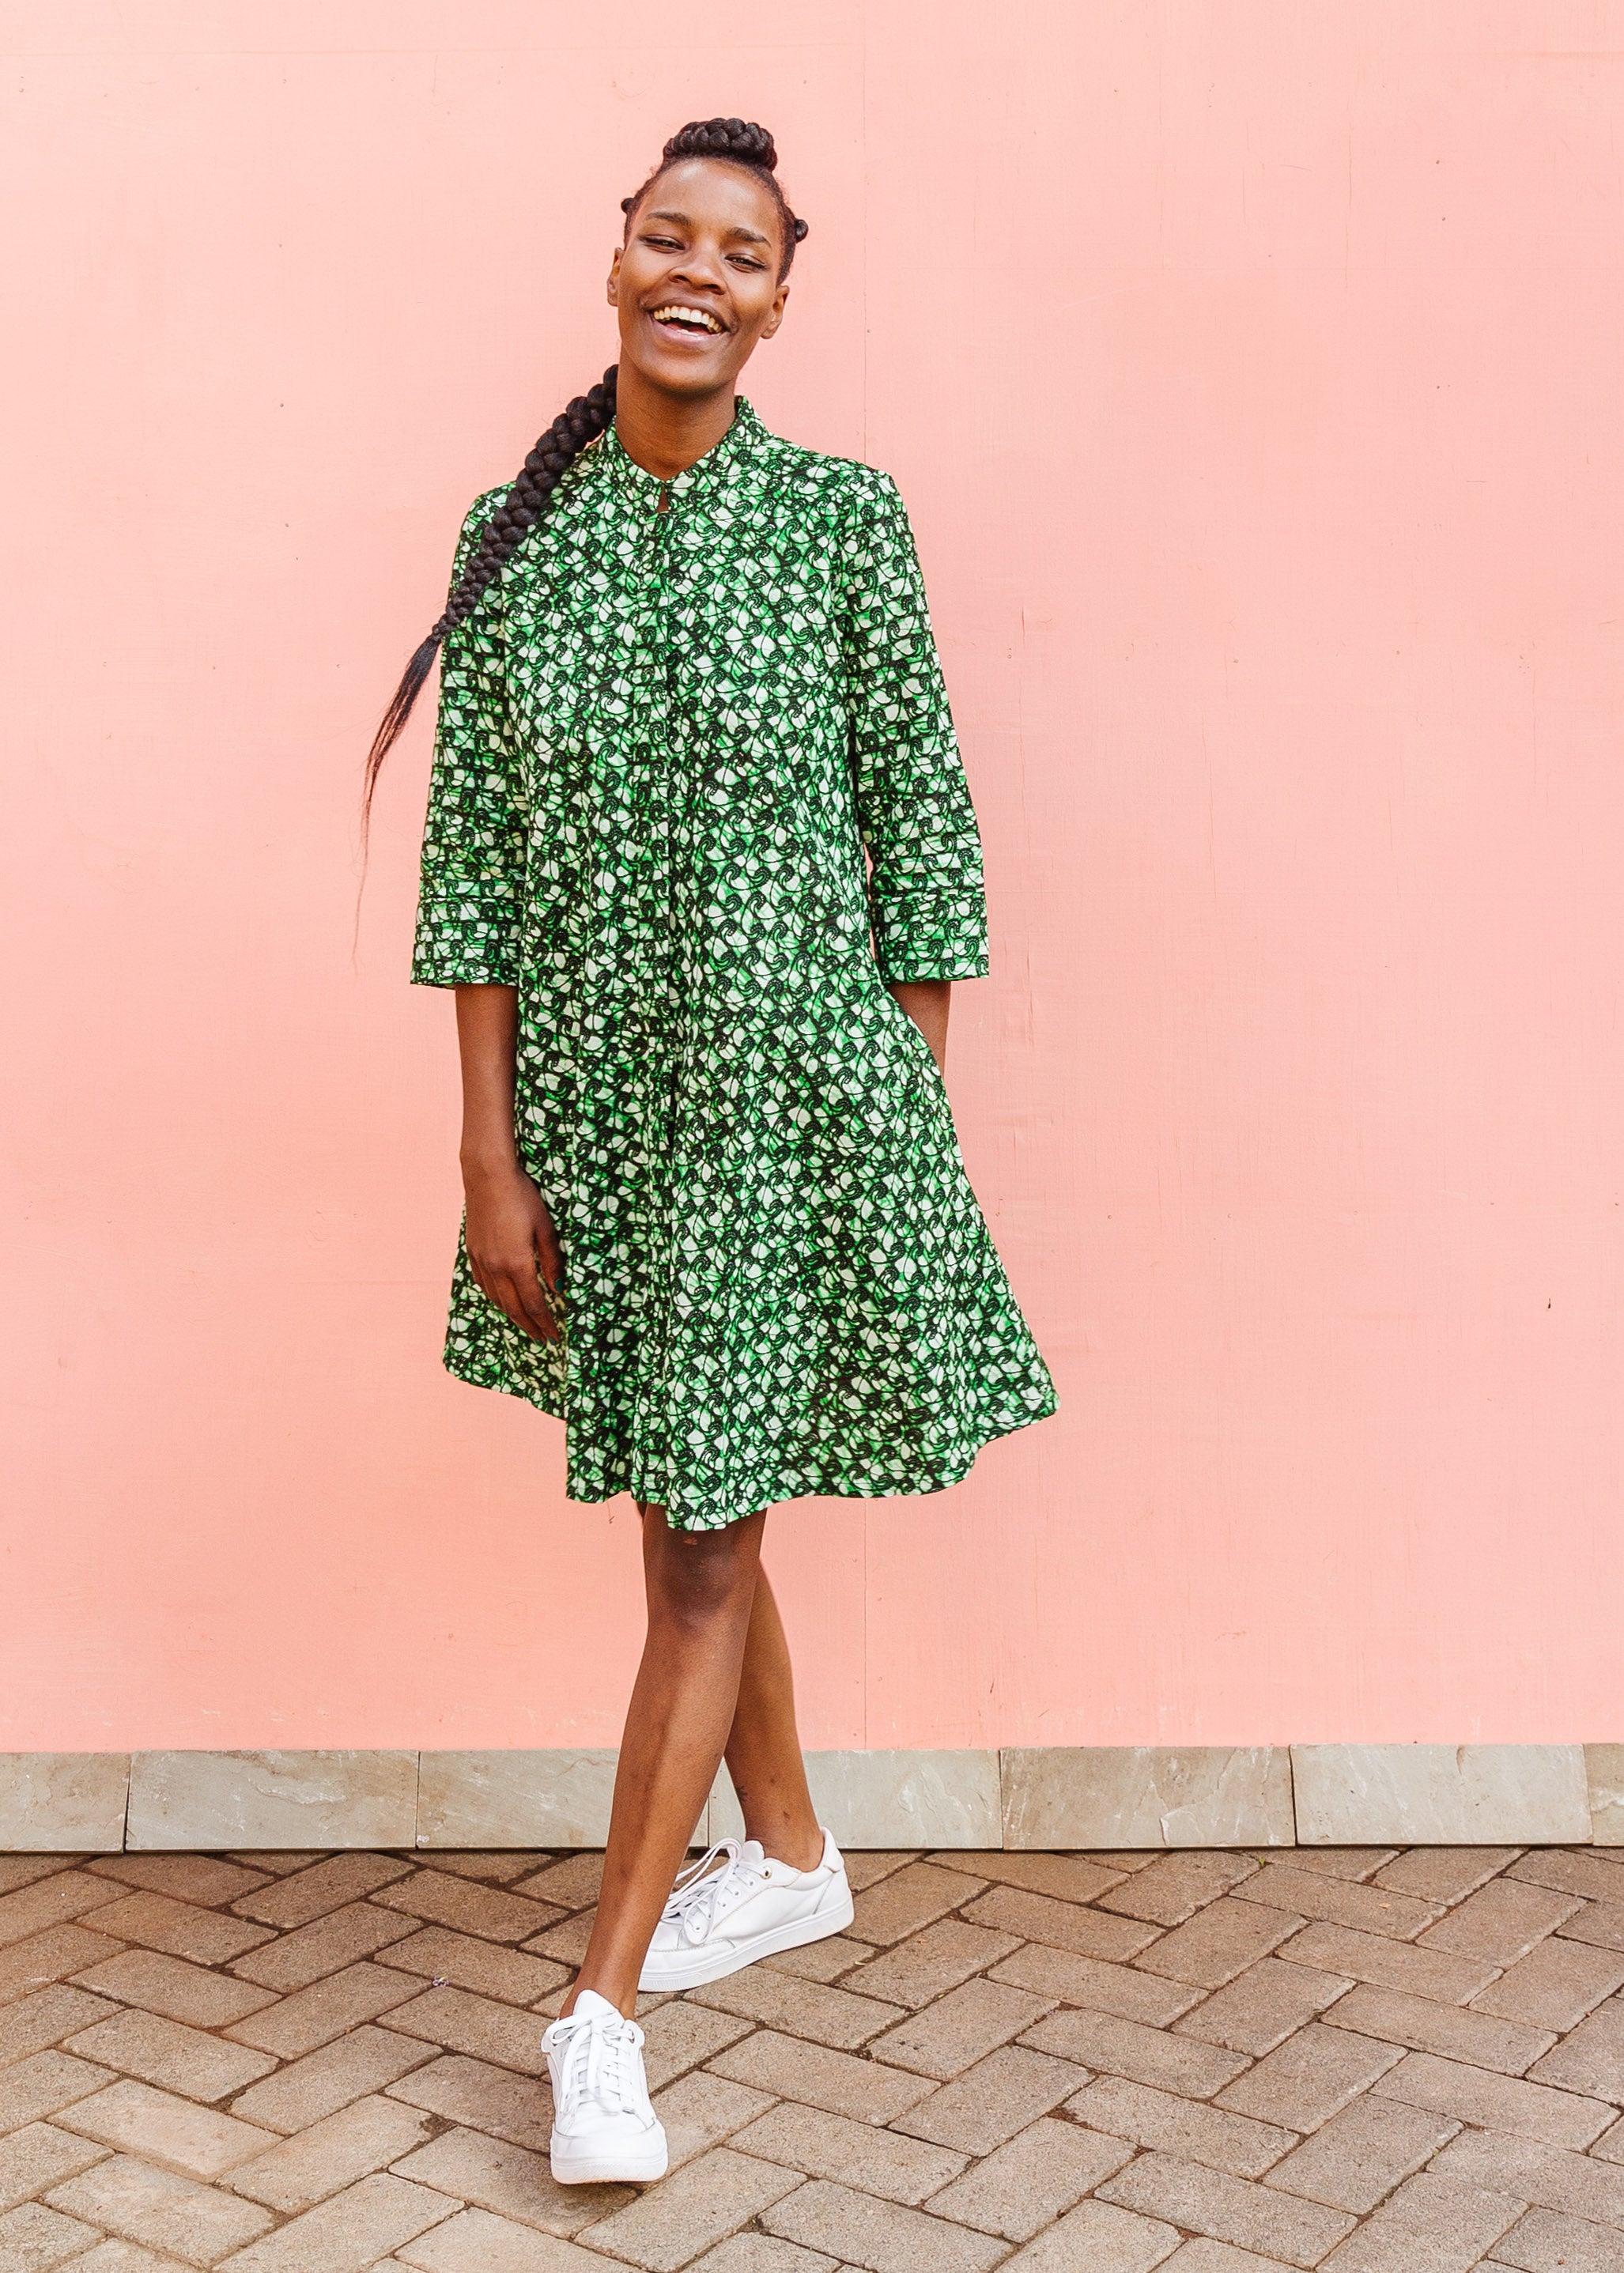 Model wearing green paisley print dress, paired with white sneakers.